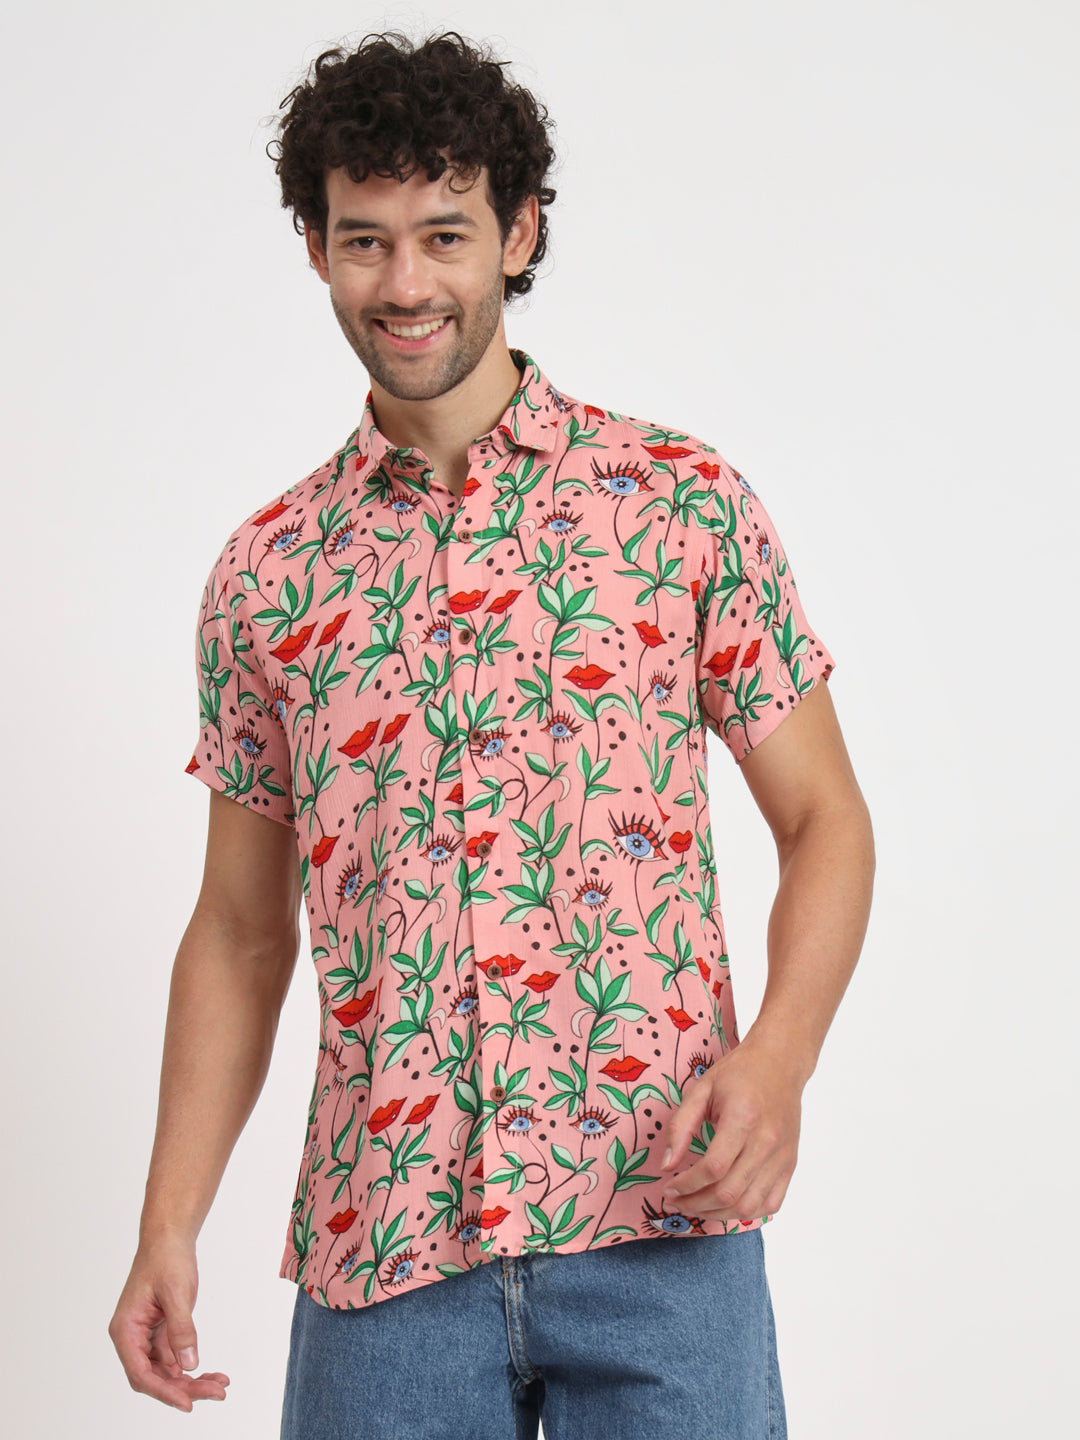 Firangi Yarn Relaxed Fit Super Flowy Re-engineered Cotton Printed Beach Shirt in Half Sleeves (Paris Pink Love)